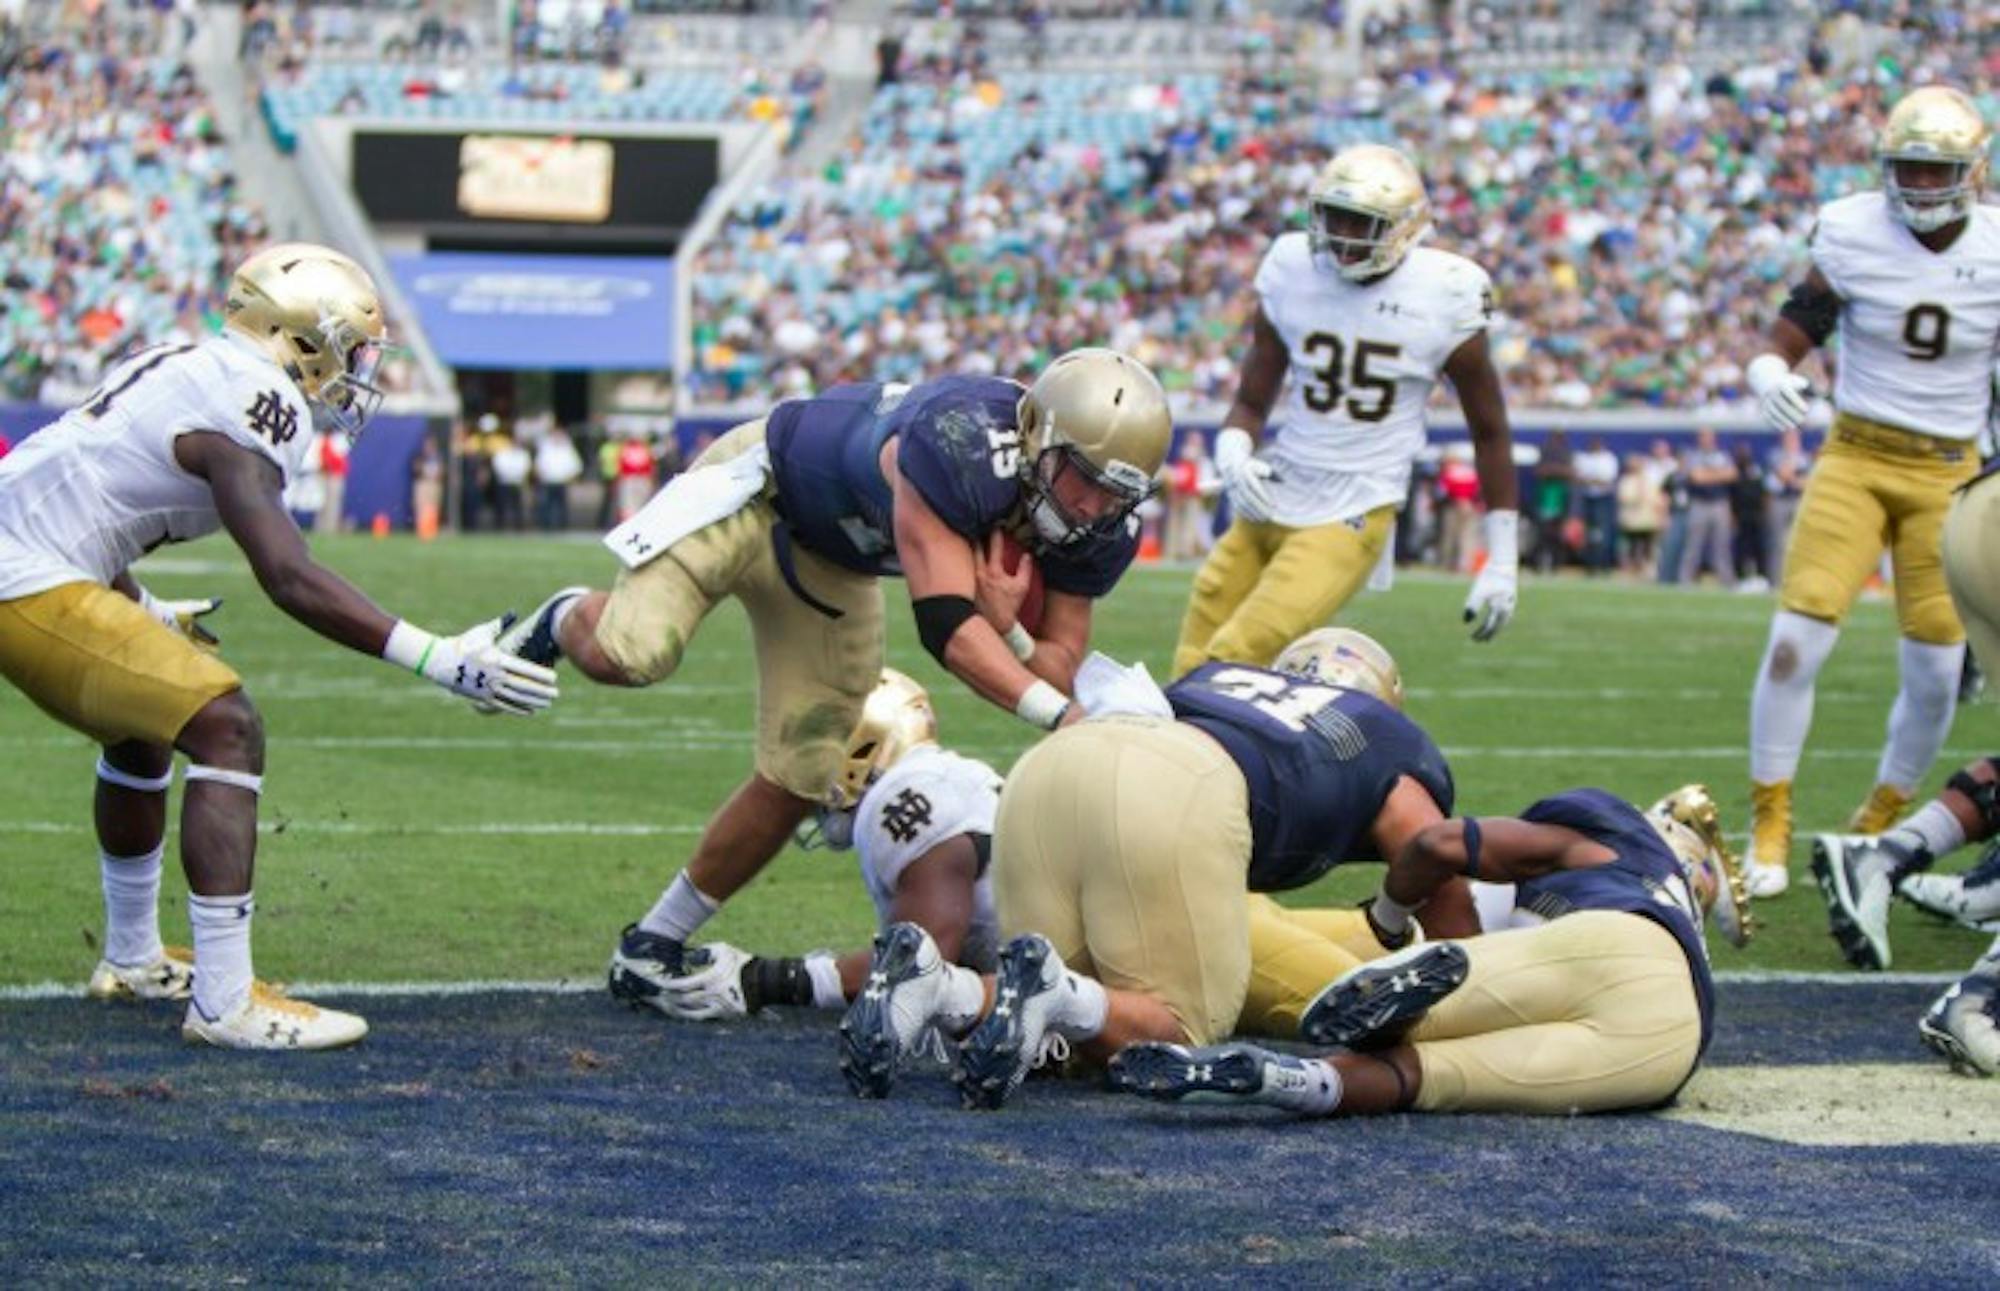 Quarterback Will Worth punches through Notre Dame defense to score the touchdown that would eventually secure the Navy victory.